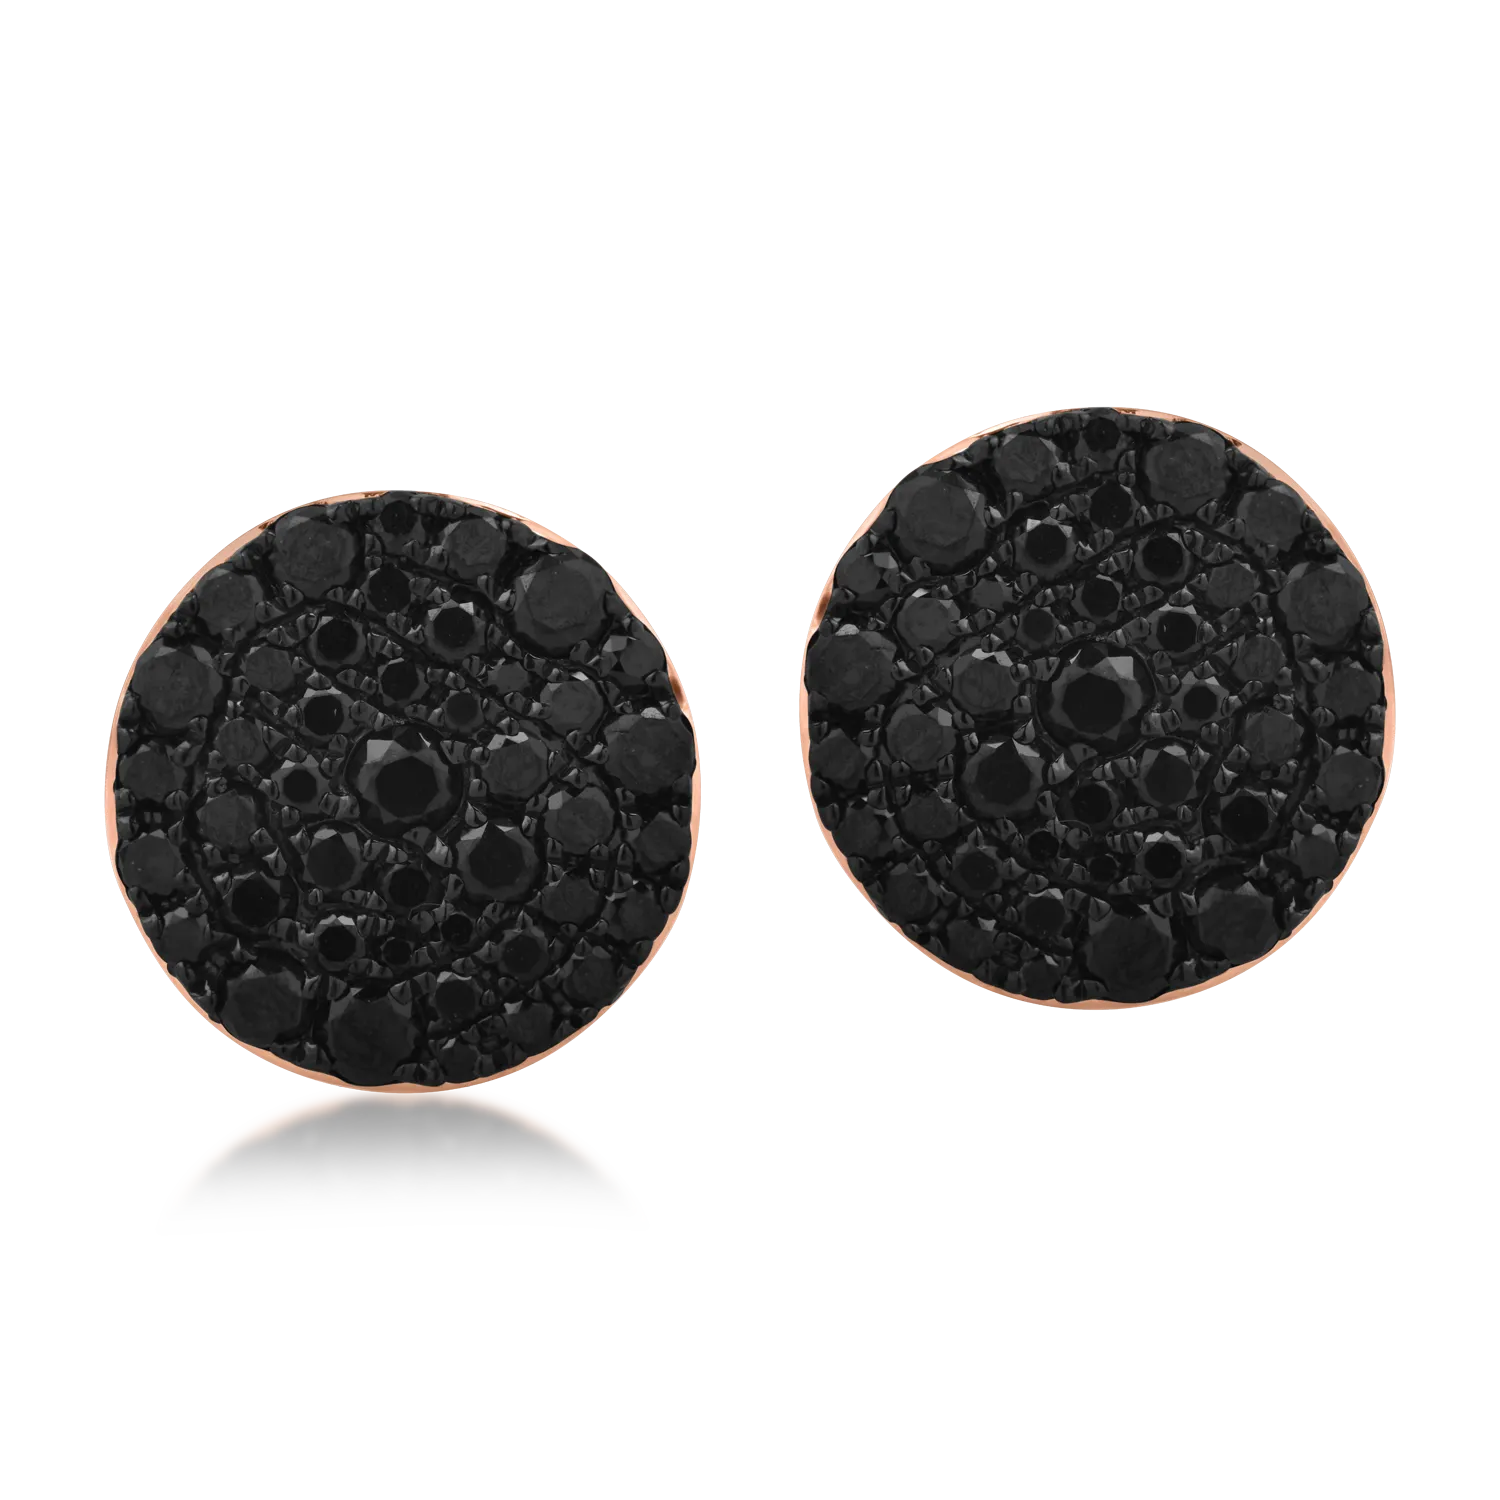 Rose gold earrings with 0.91ct black diamonds